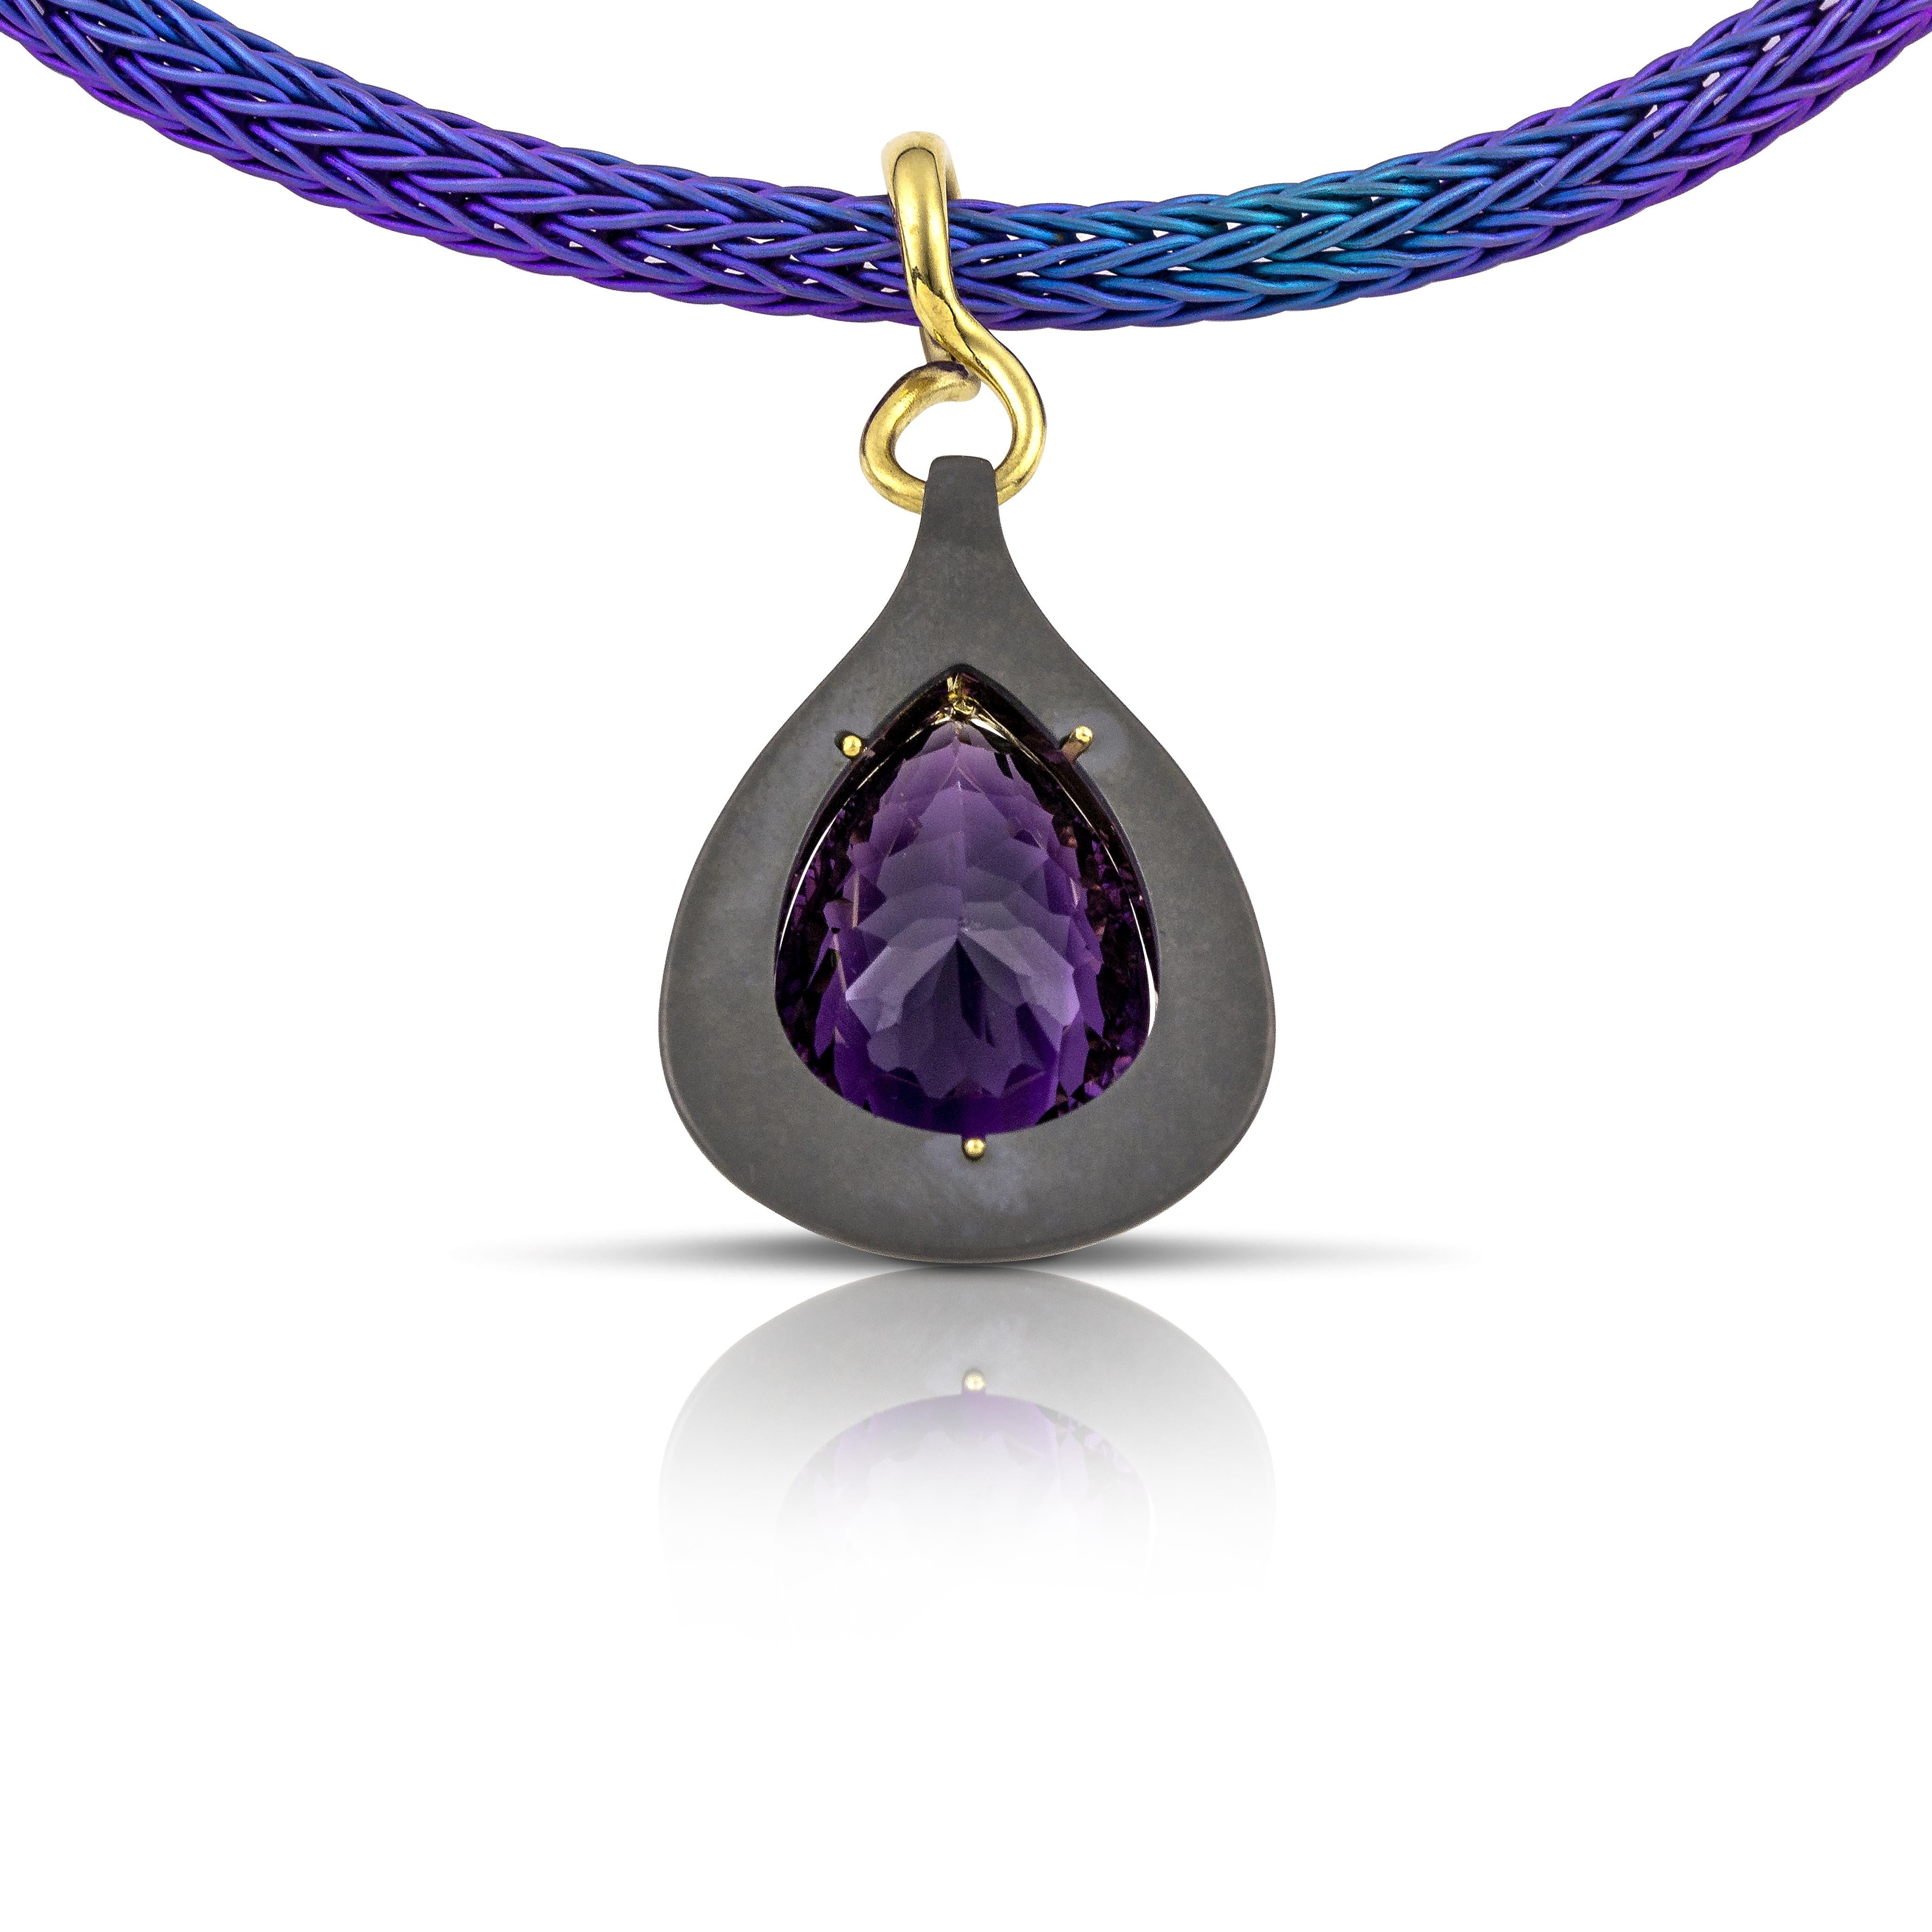 Drop Amethyst Necklace by Vasilis Giampouras at Second Petale Gallery
At the heart of this masterpiece lies a mesmerizing drop amethyst, surrounded delicately within a halo of gleaming 18k gold and a durable pure titanium bezel. The rich purple hues